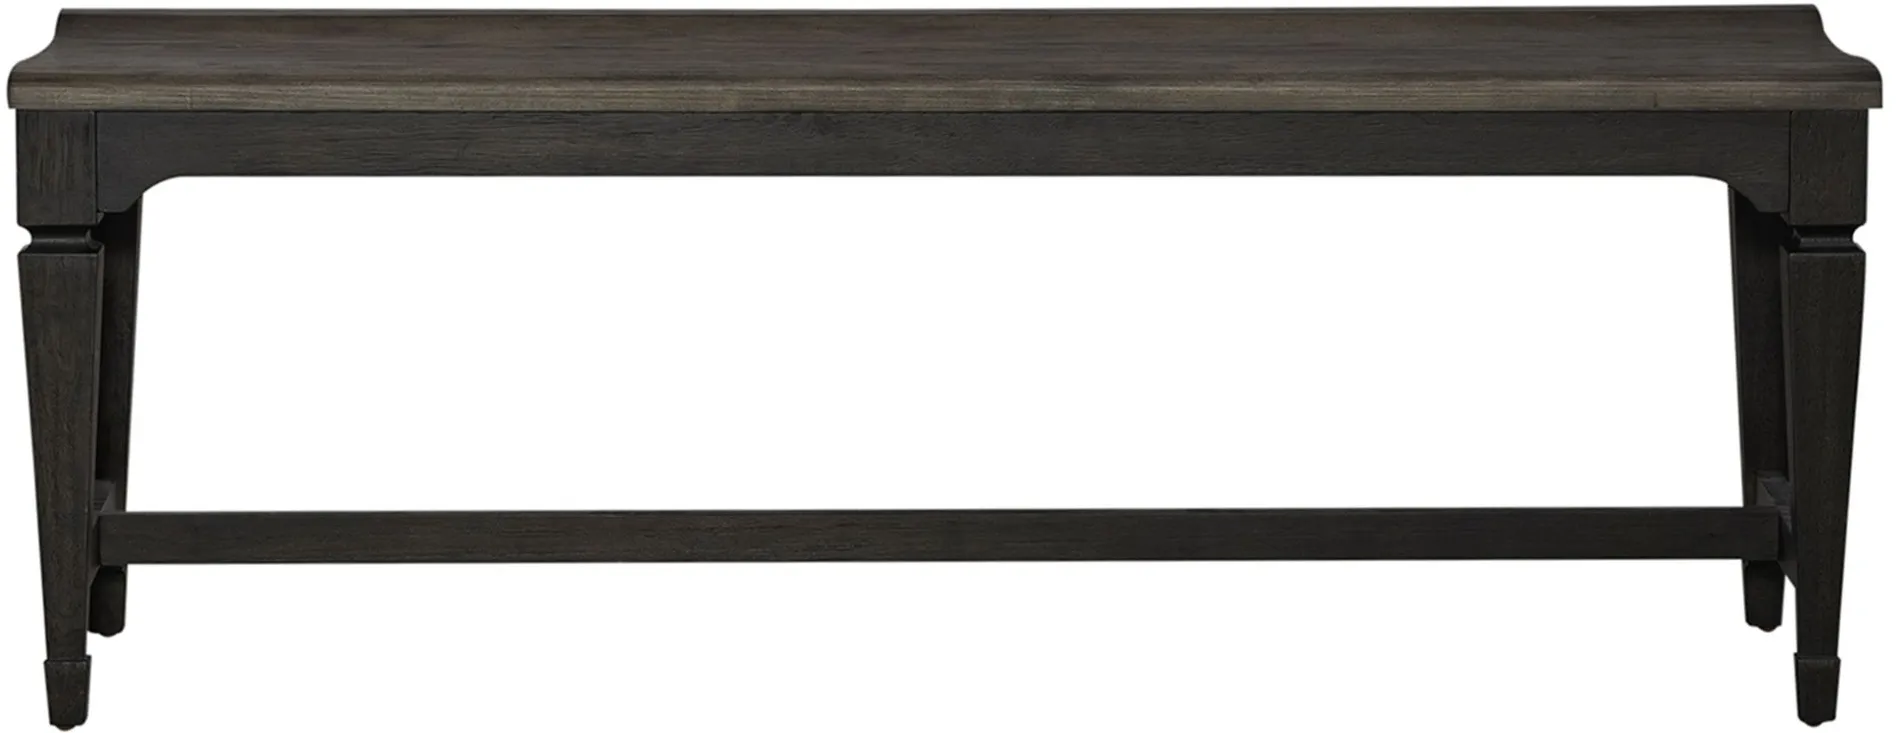 Allyson Park Bench in Wirebrushed Black Forest by Liberty Furniture